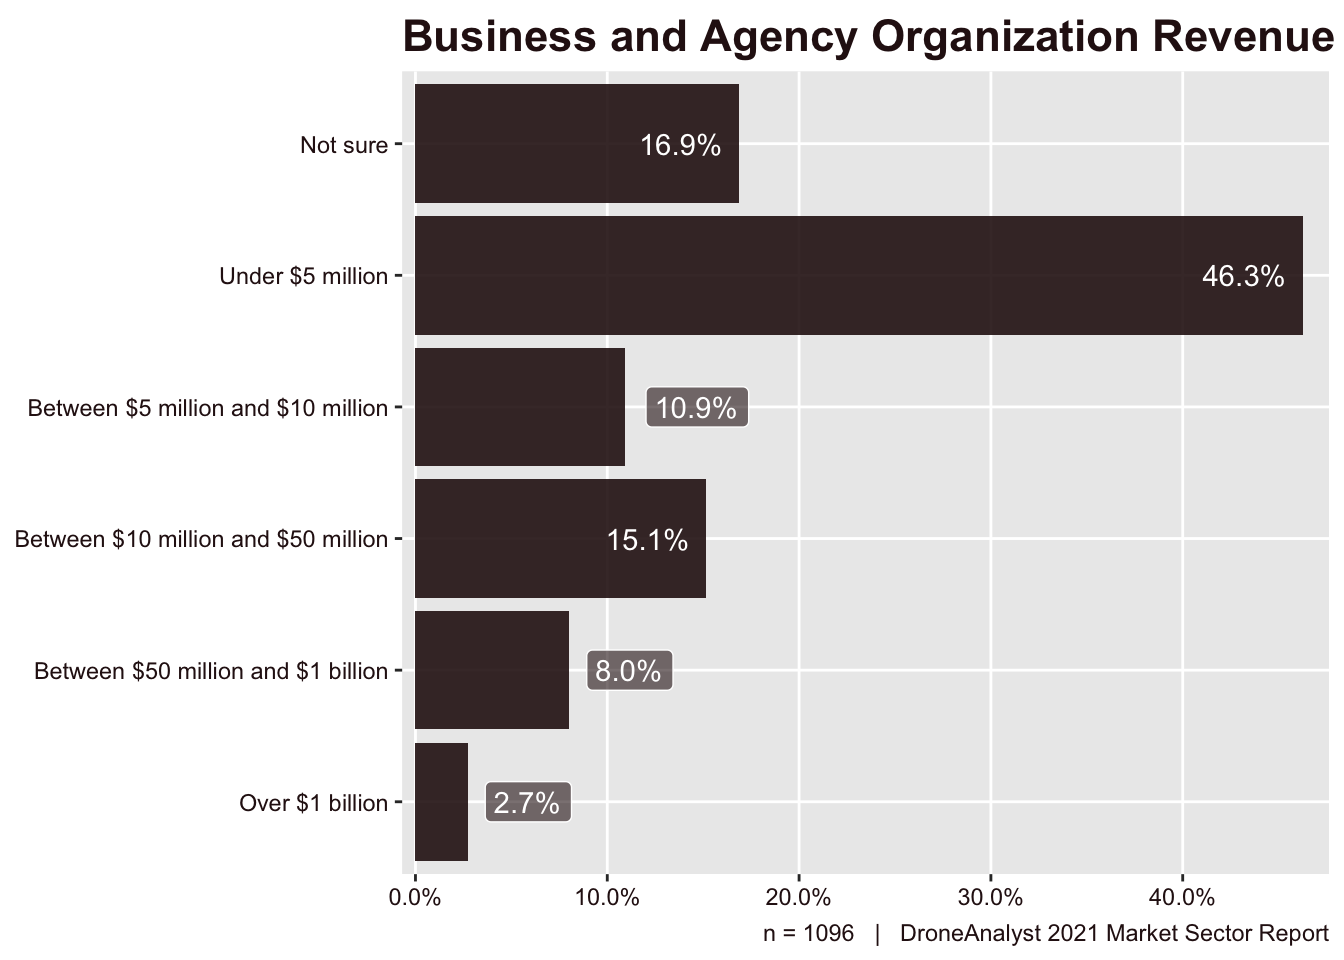 Business and Agency Organization Revenue